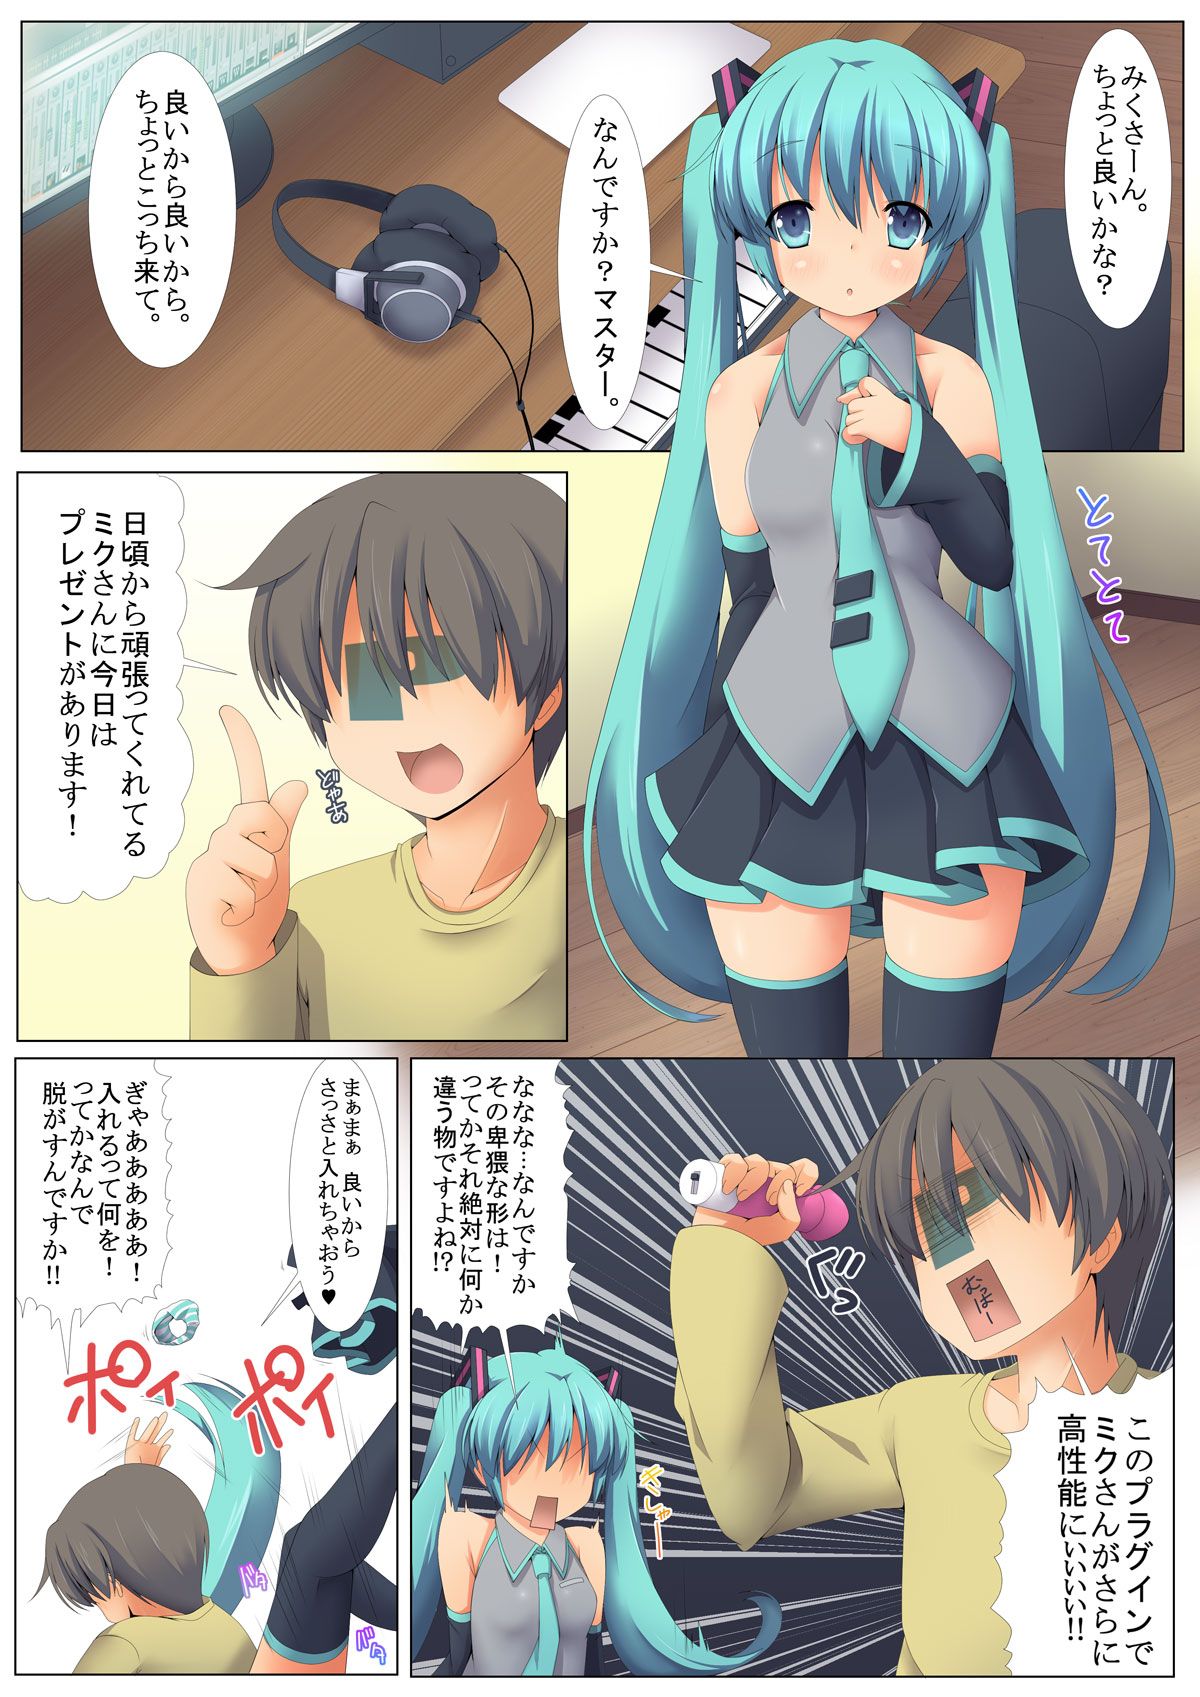 A two-dimensional hatsune miku VOCALOID hecka Mexico erotic images give wwww 44 38